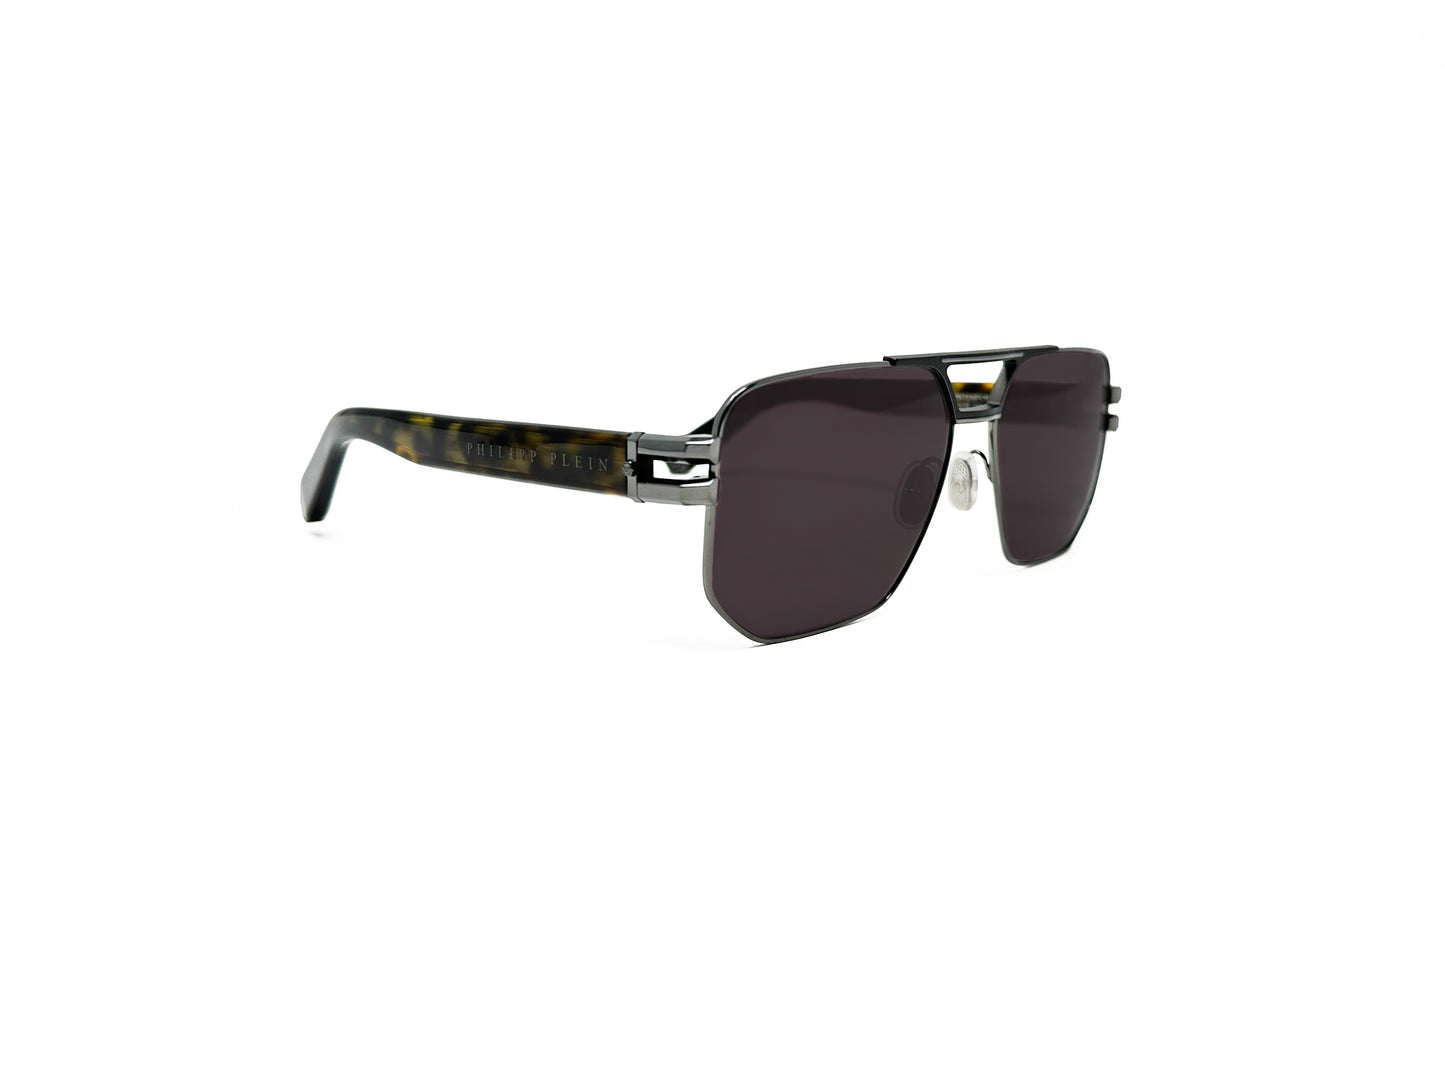 Philipp Plein squared aviator sunglass. Model: SP012 Contemporary. Color: 0584 gunmetal with tortoise temples. Side view.